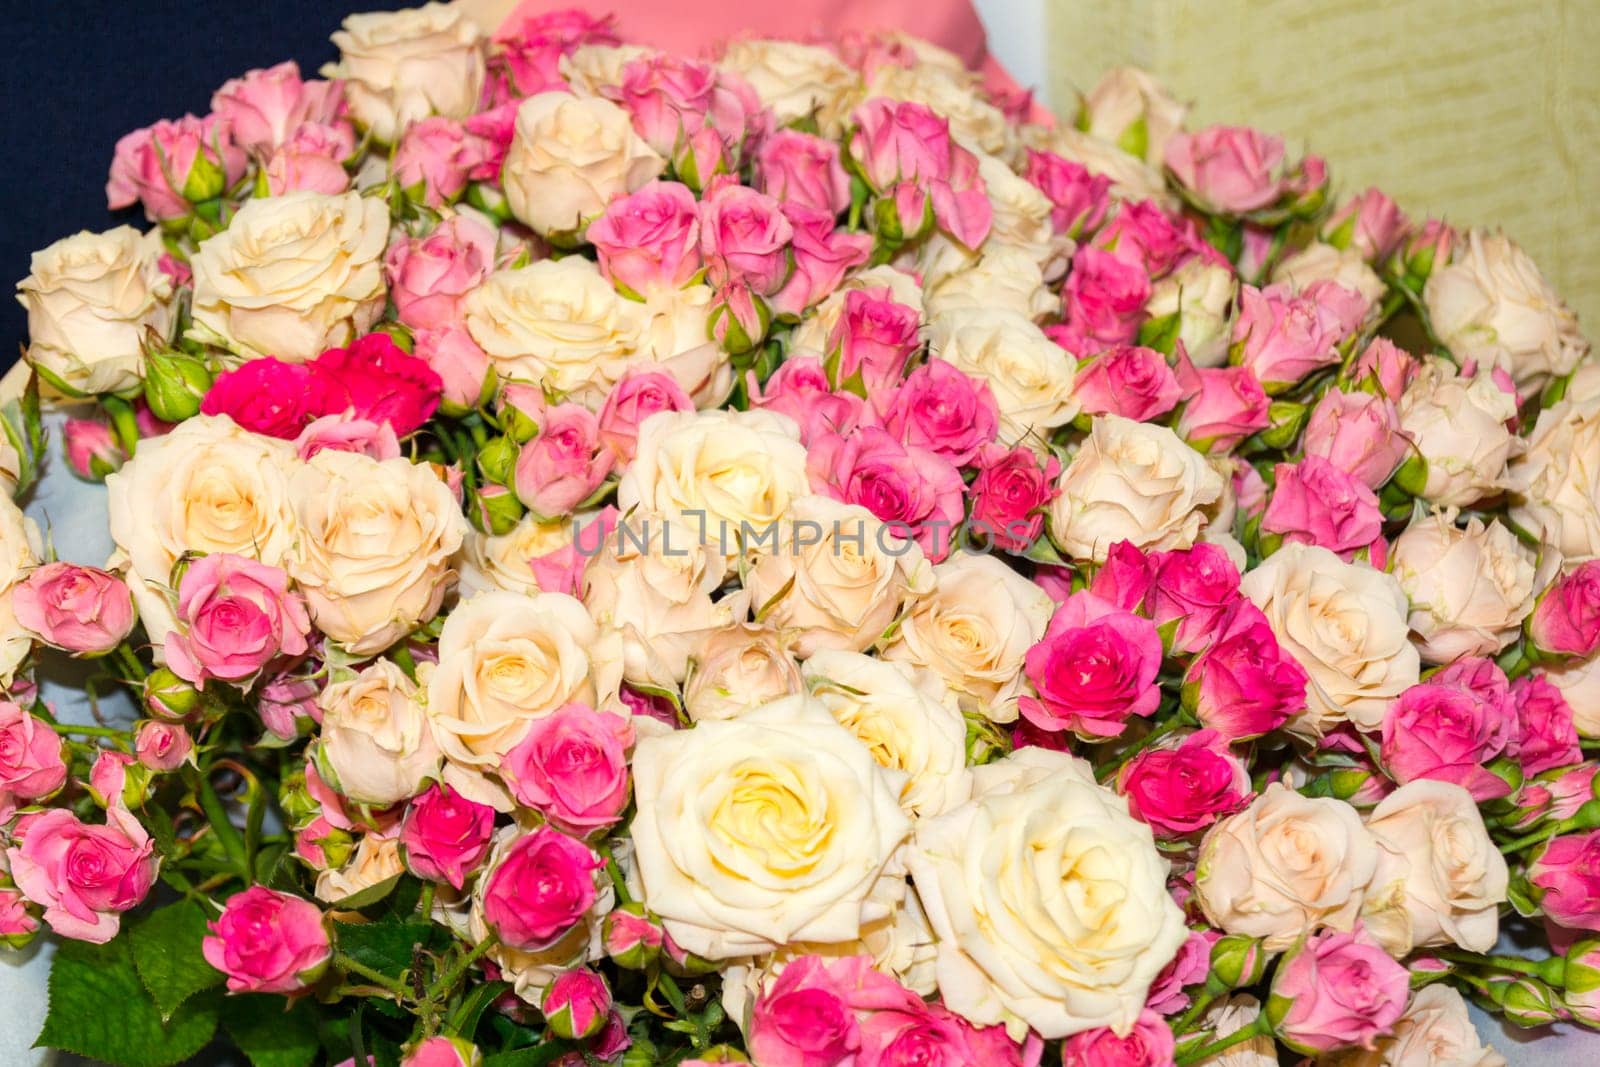 A very large bouquet of yellow and pink roses.